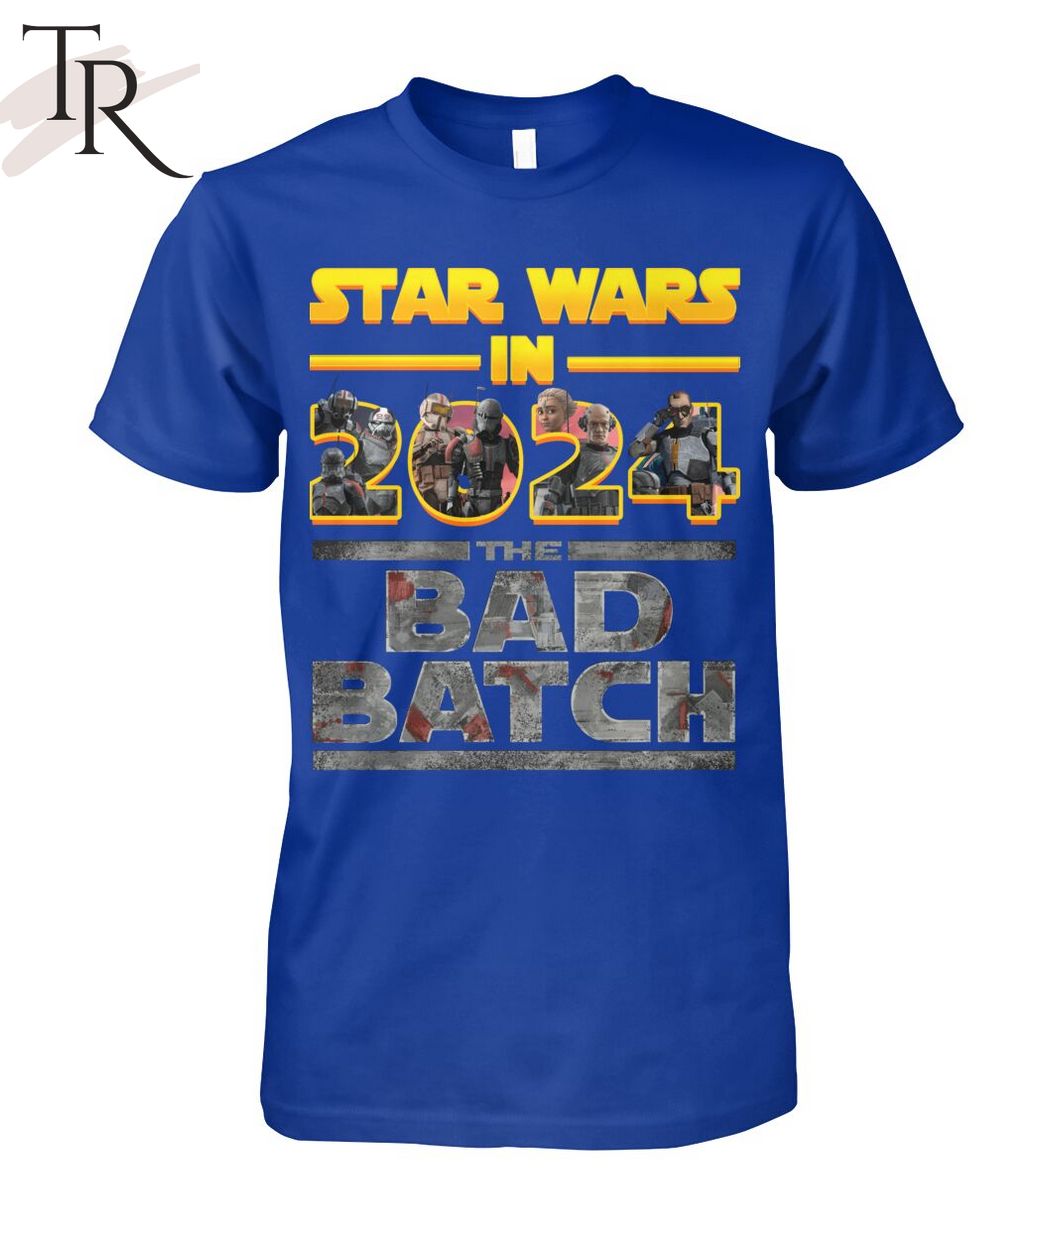 Star Wars In 2024 The Bad Batch T-Shirt